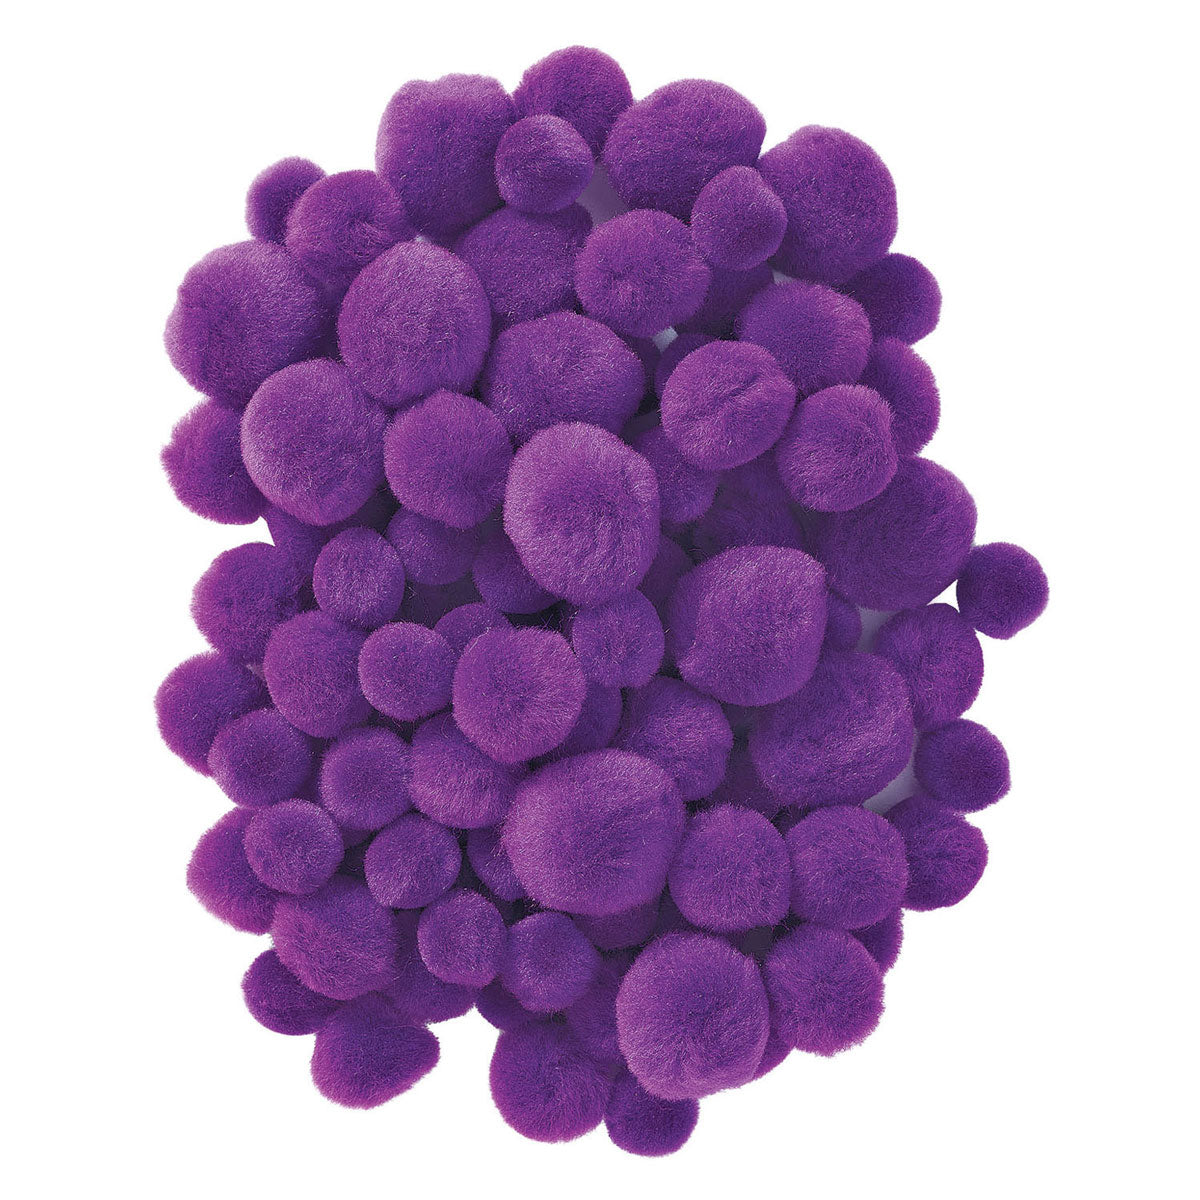 Colorations Pom Poms Paars, 100st.